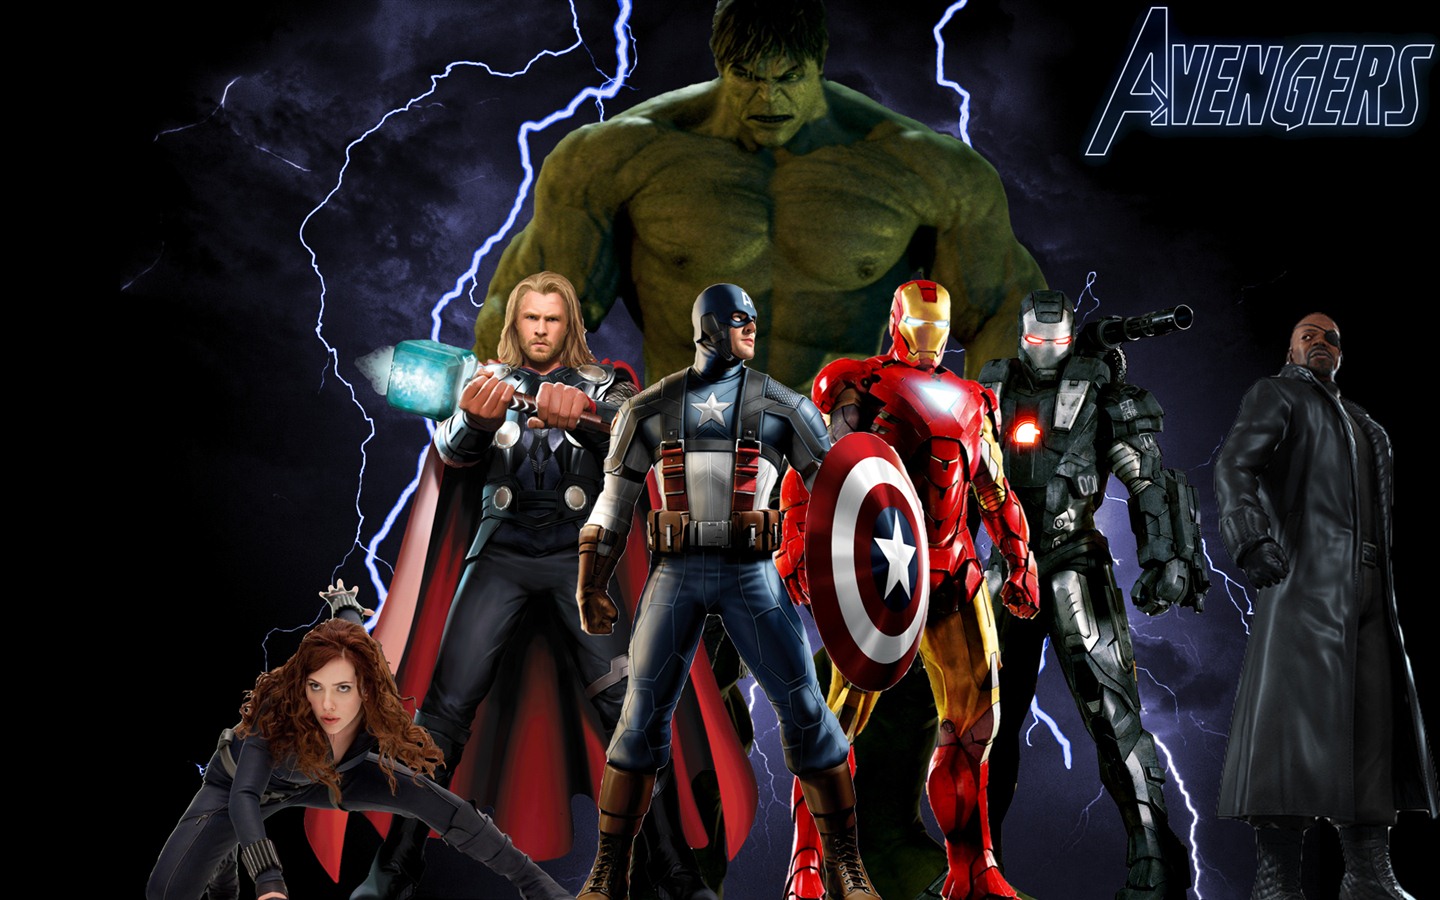 The Avengers 2012 HD wallpapers #5 - 1440x900